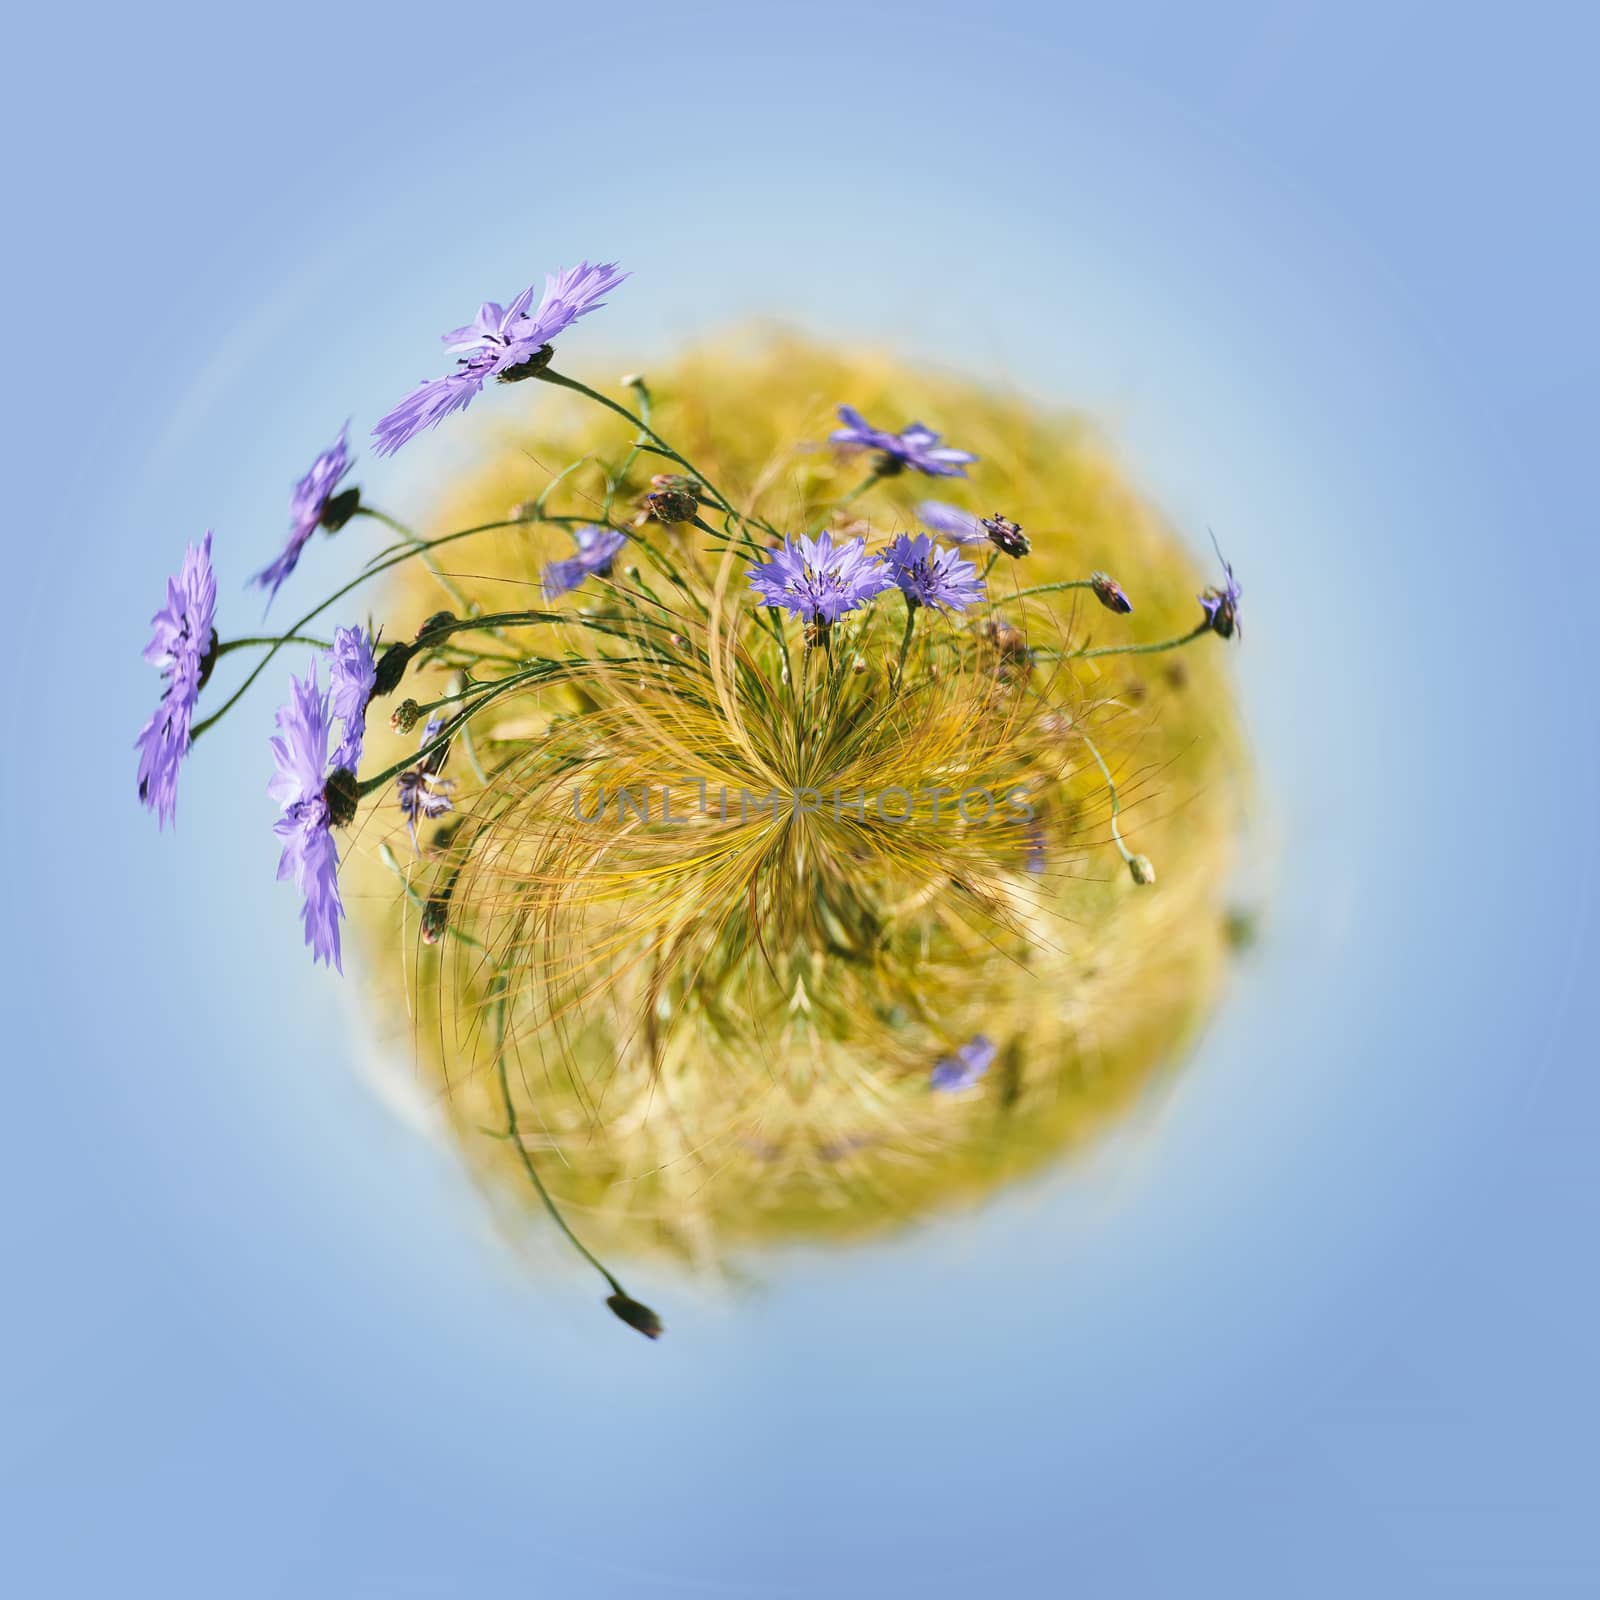 little planet with blue cornflowers in the wheat field with blue sky. ecology concept. Tiny flower  planet